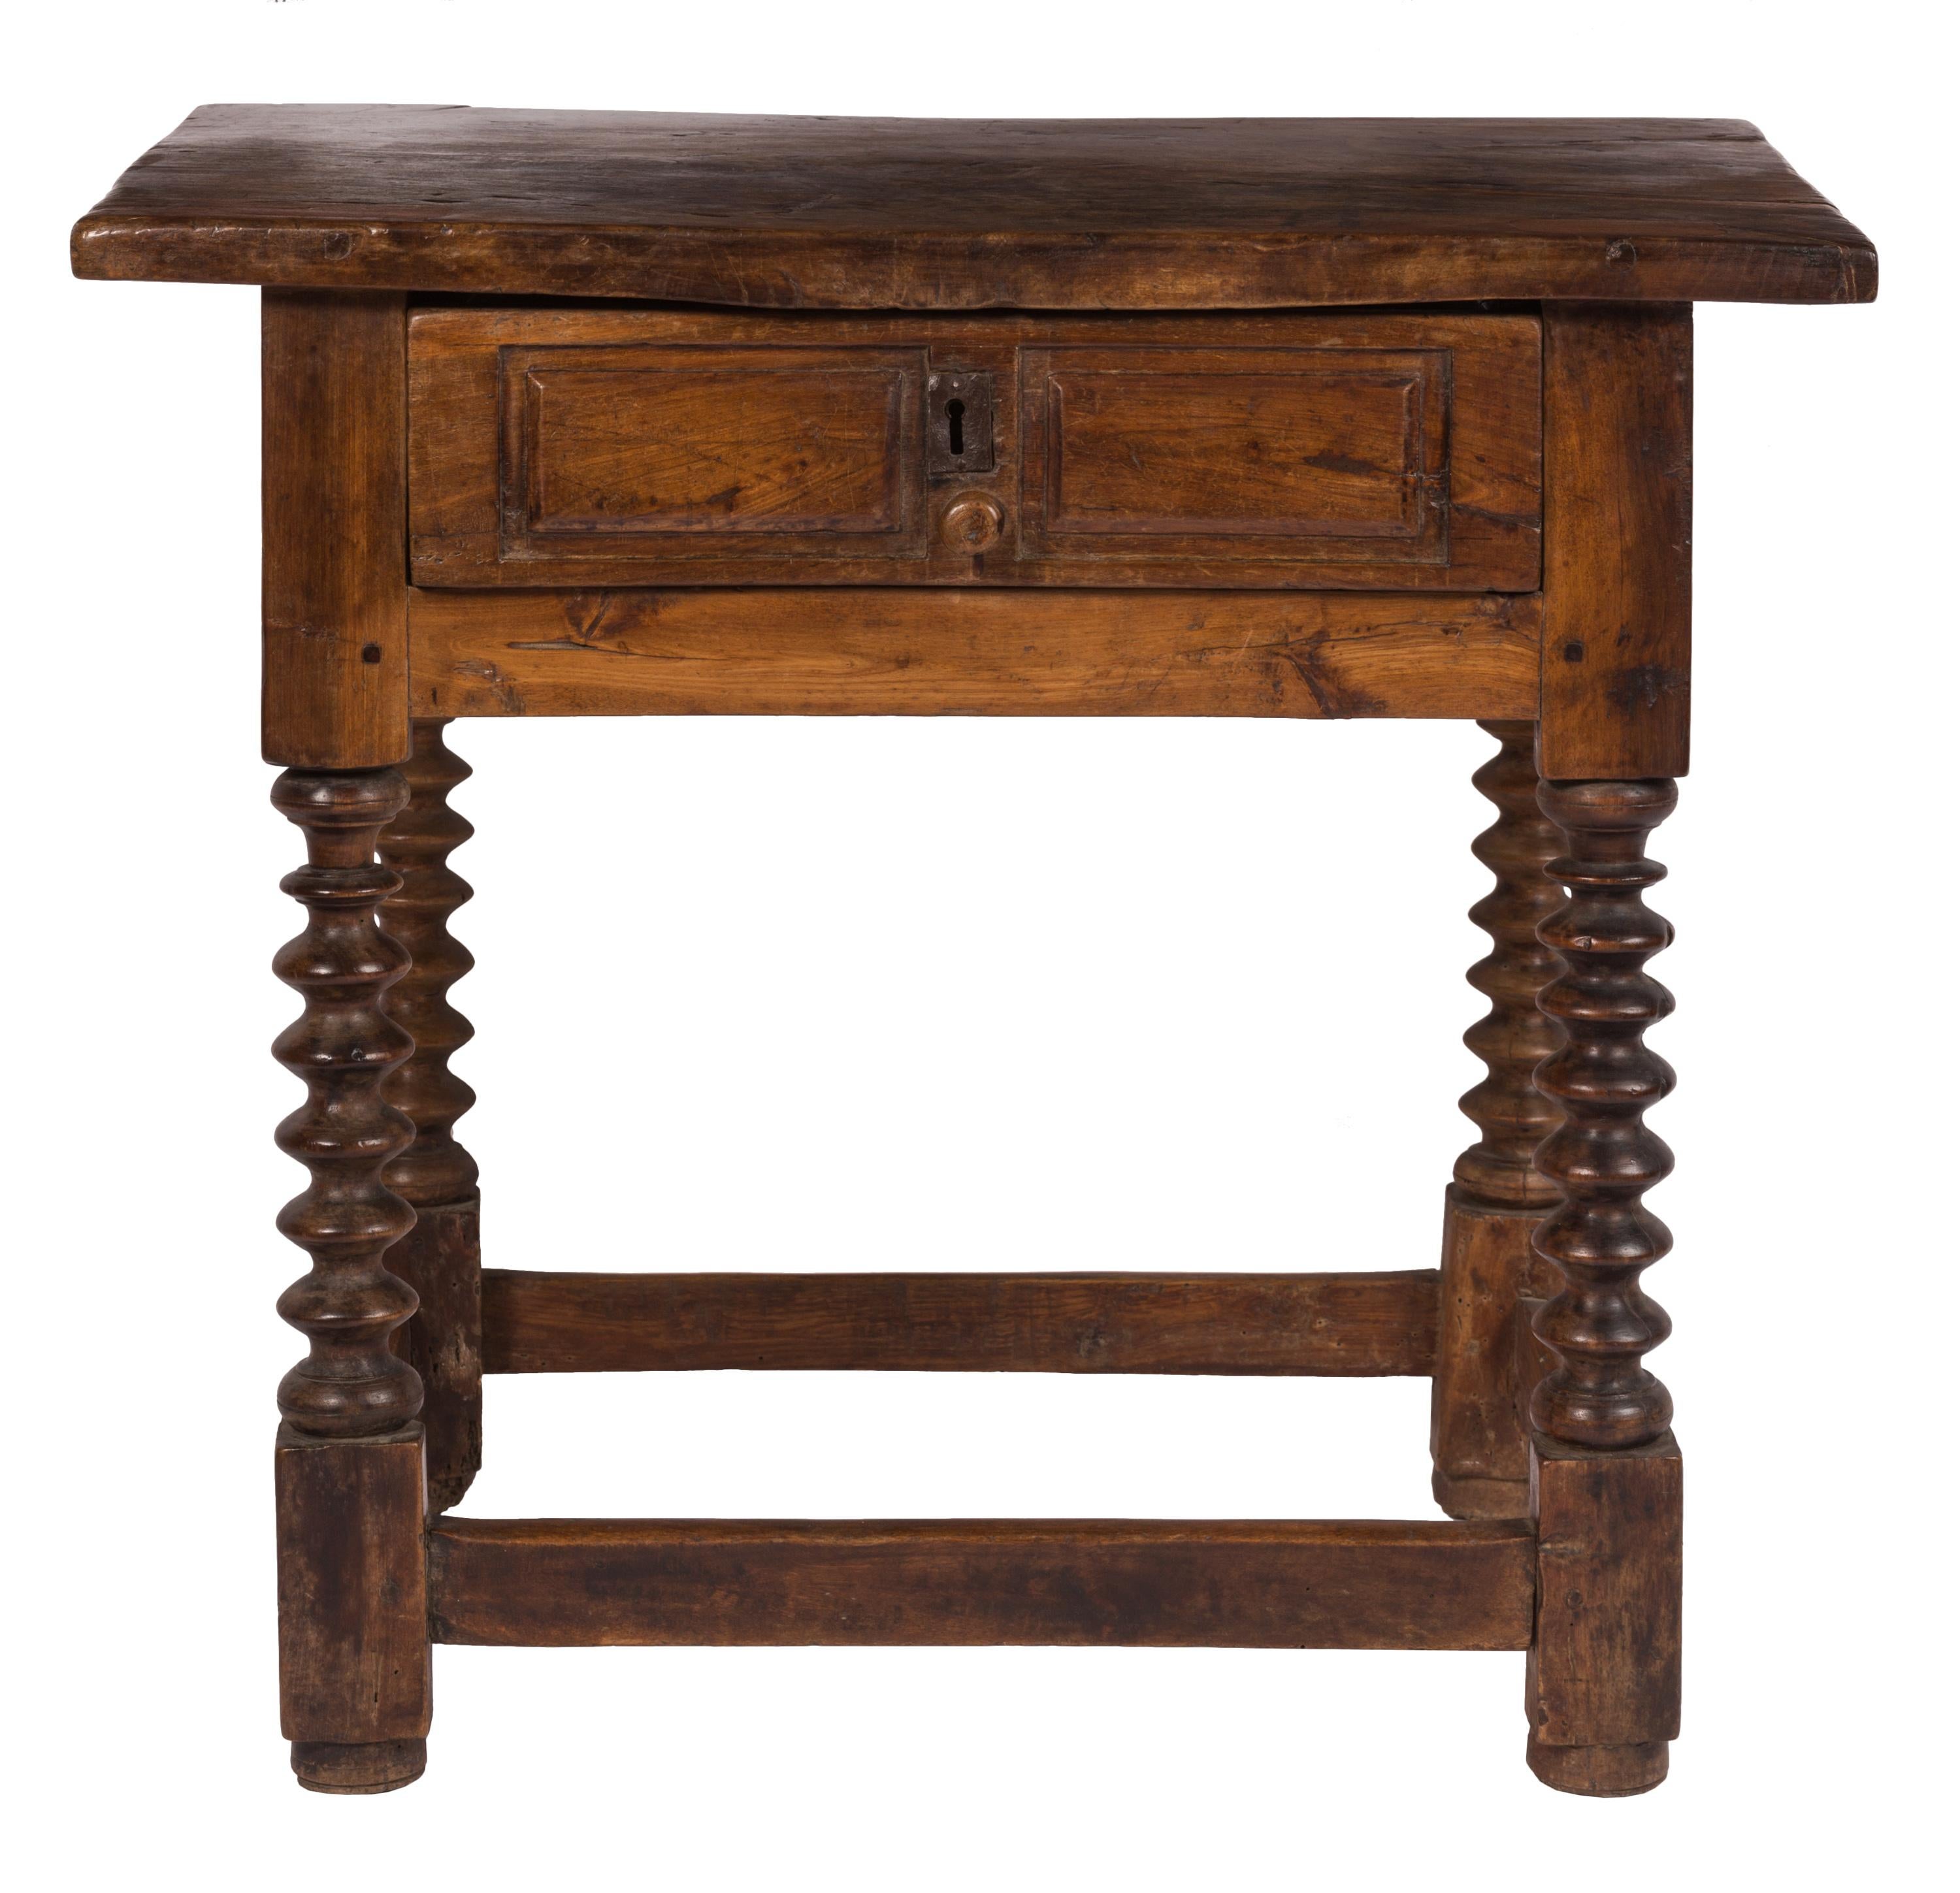 A small-sized 18th century Spanish shoemaker's table (mesa de zapatero) with a single drawer and spool turned legs. The tabletop is a single plank, legs attached with mortise and tenon joints - with the front two going all the way through the board.